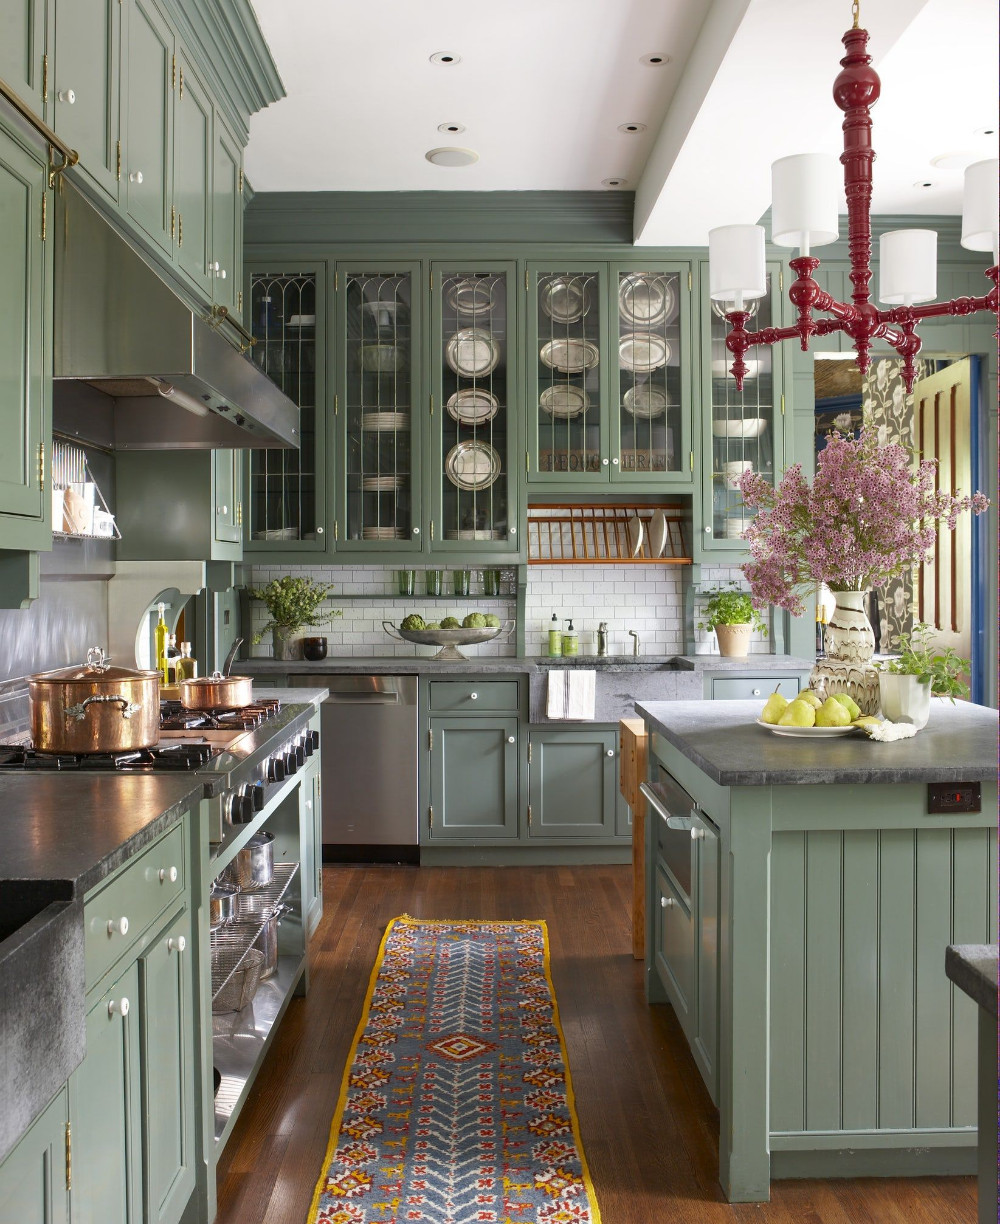 Olive Green Kitchen Walls
 copper and green kitchen Google Search in 2020